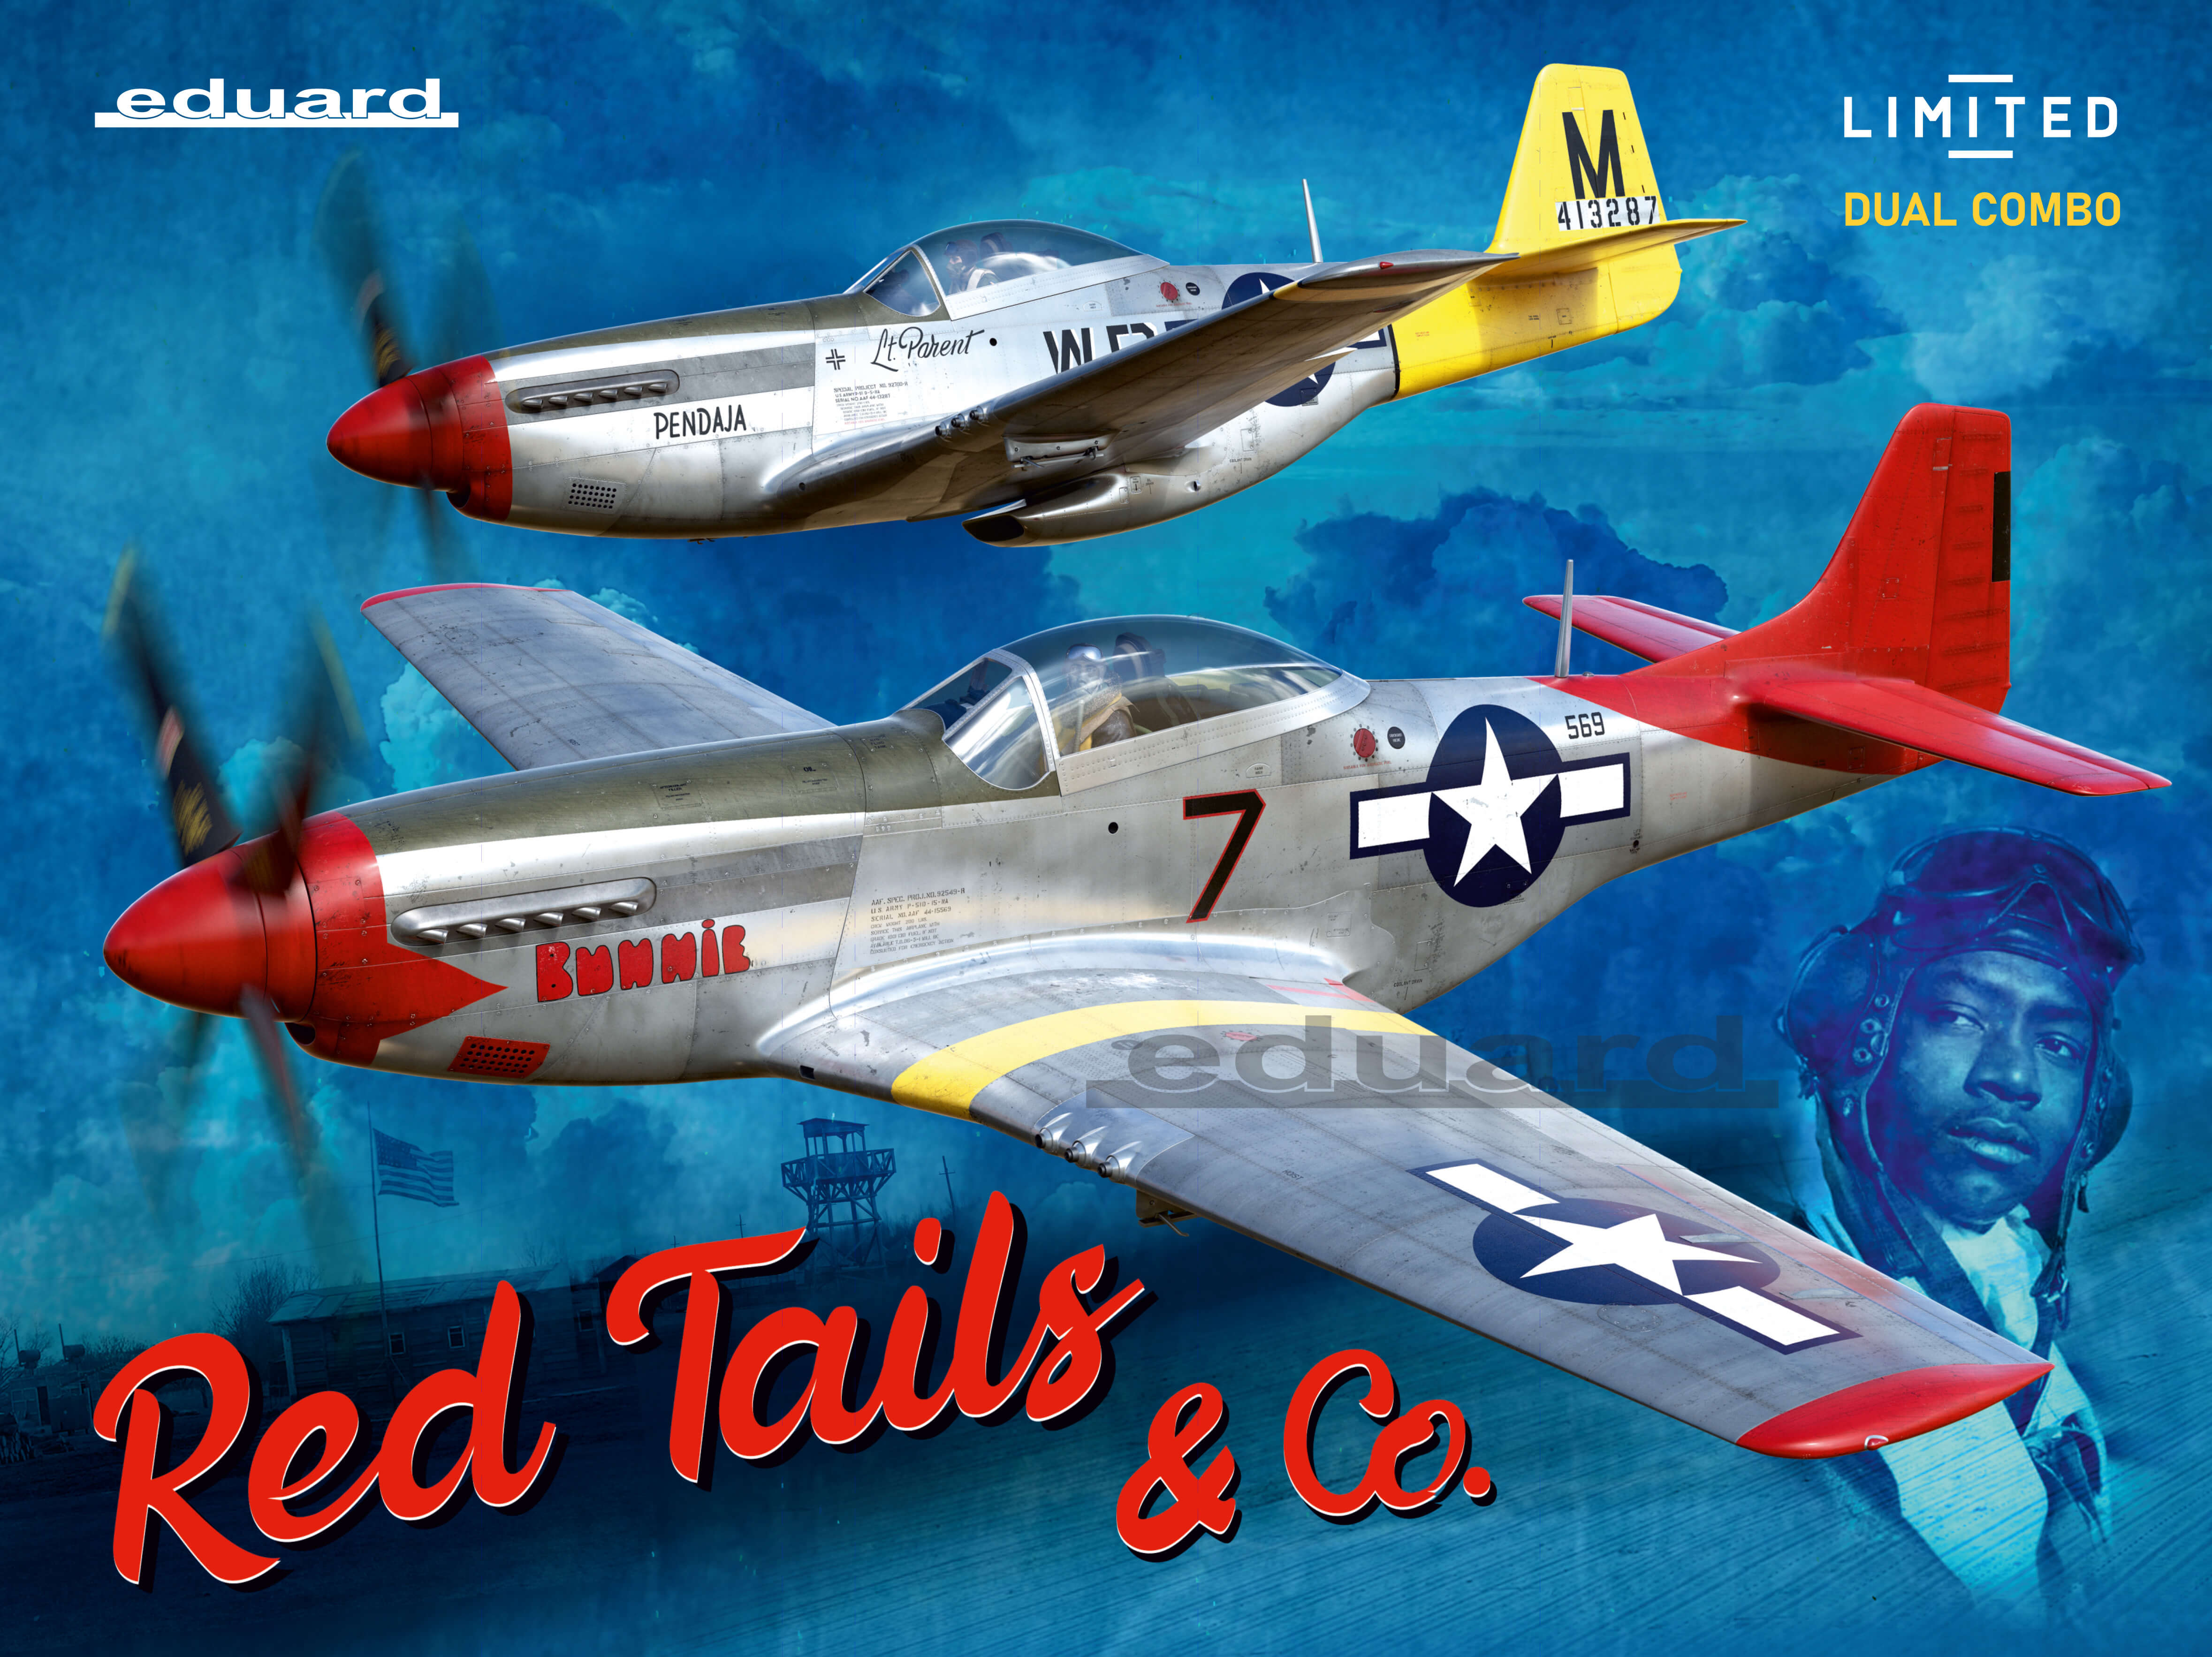 1/48 P-51D Mustang - RED TAILS & Co. DUAL COMBO (Limited edition)